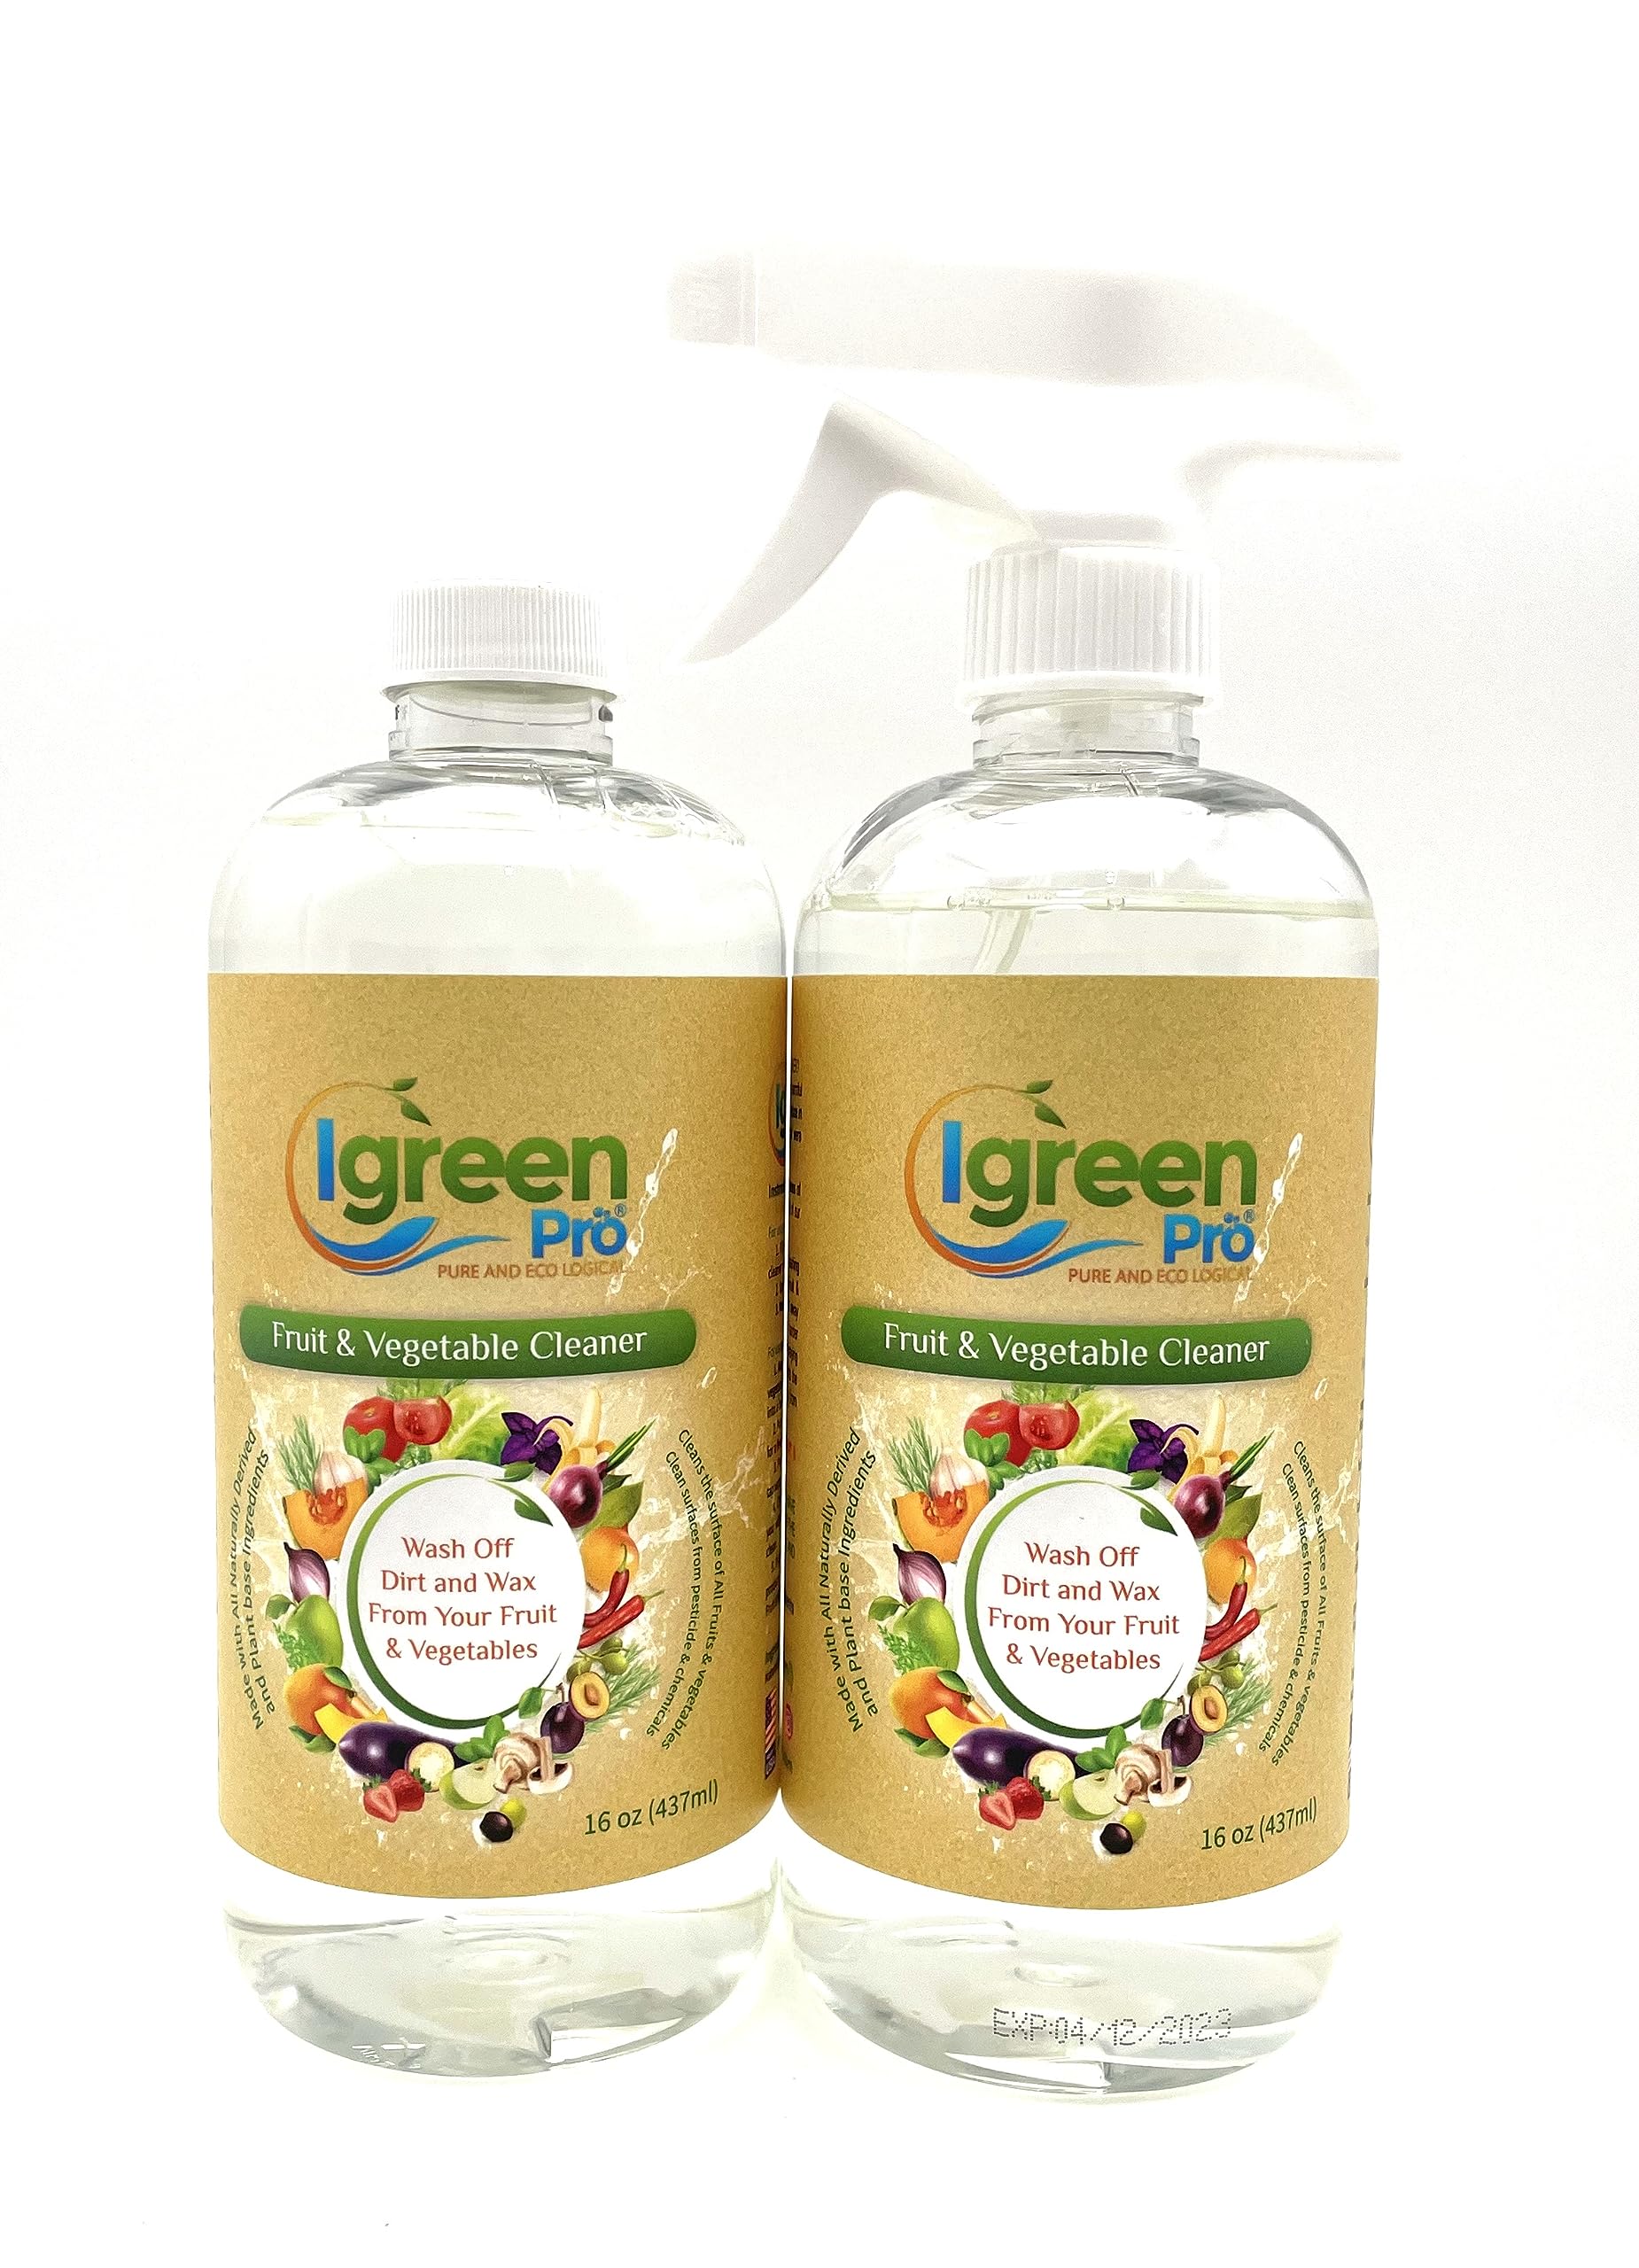 Veggie Wash  Fruits & Vegetables Cleaning Products